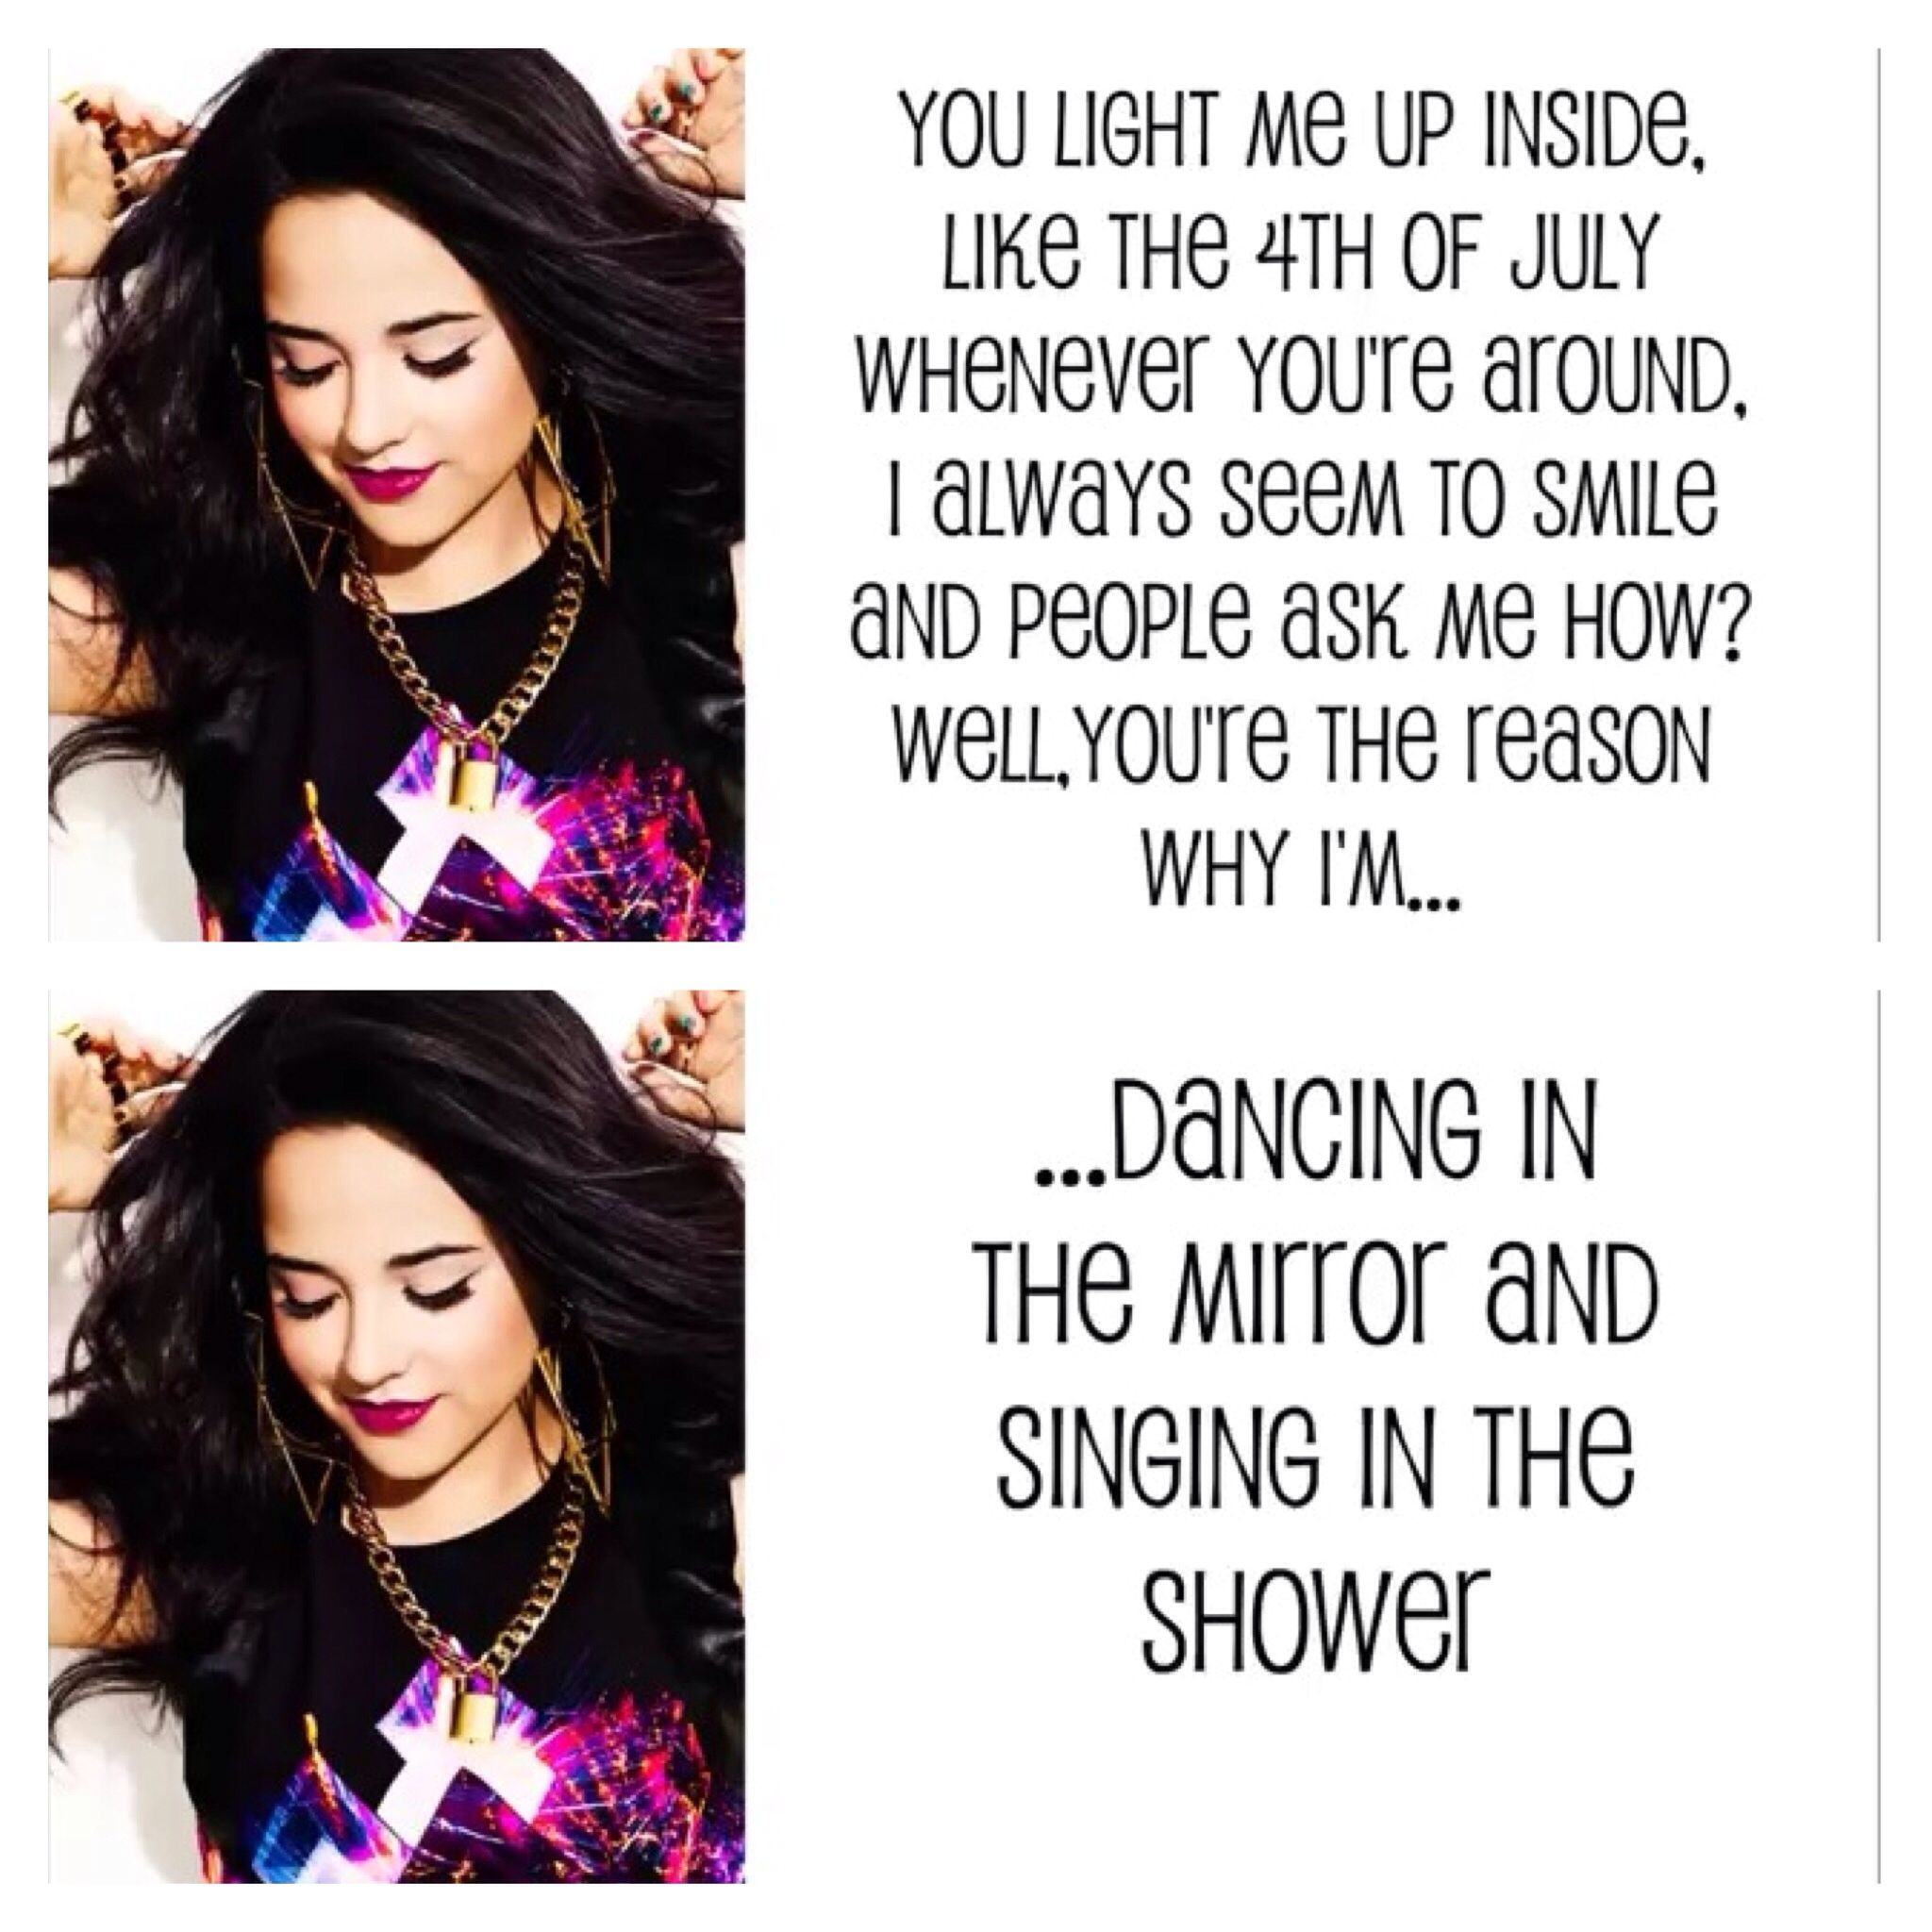 Becky G Singing In The Shower! Love The Lyrics Of This Song für Dancing In The Mirror Singing In The Shower